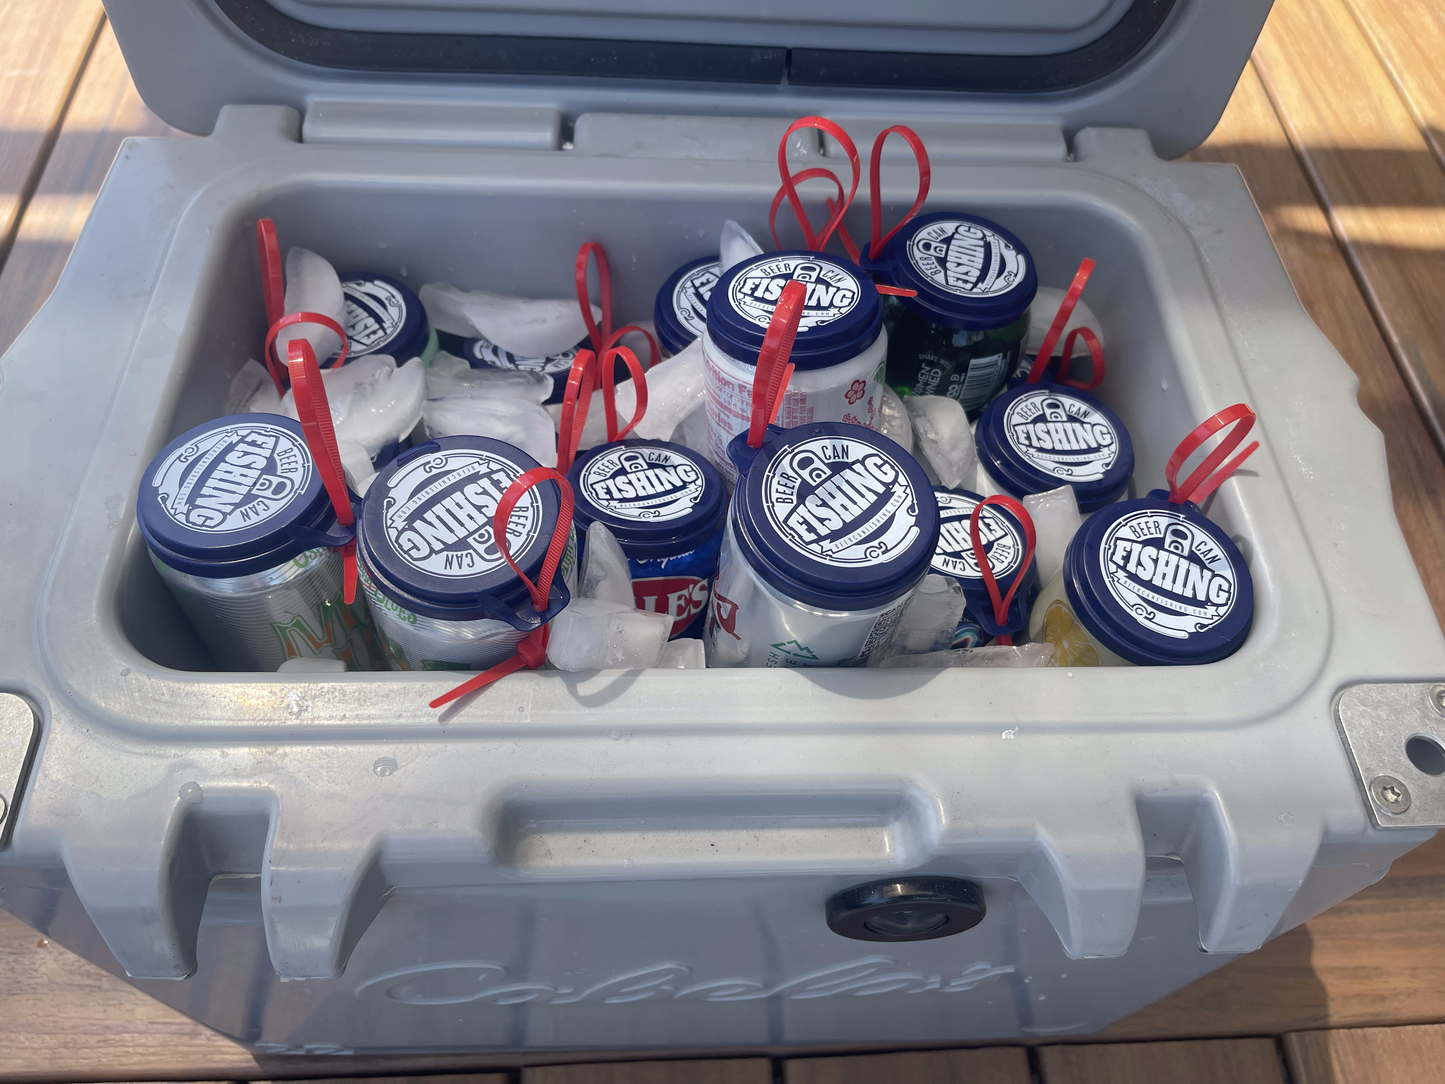 18 pack of beer can fishing game lids in a cooler